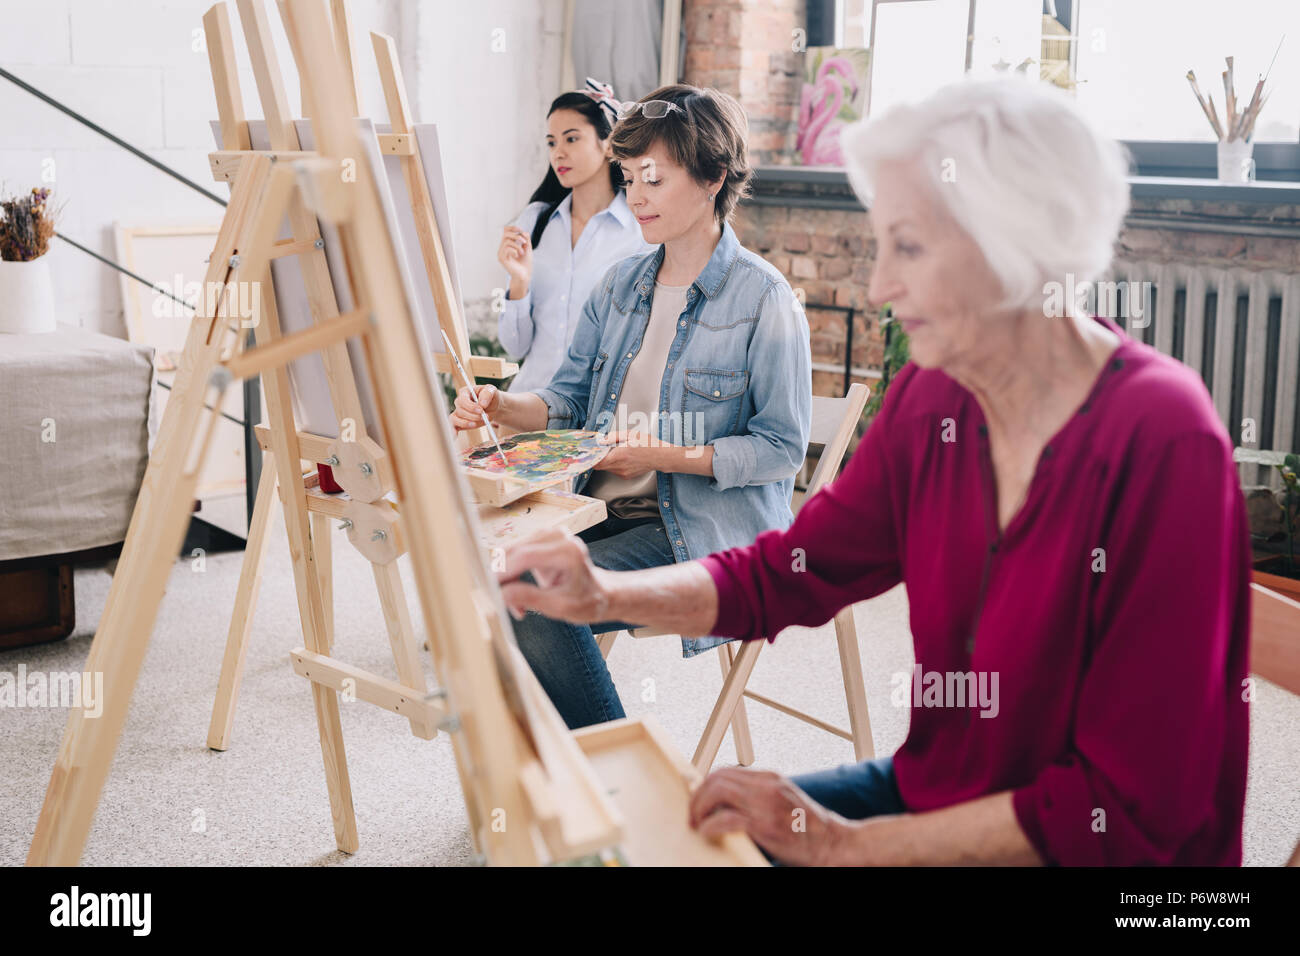 Portrait of art students sitting in row and painting at easels in art  studio, focus on smiling adult woman enjoying work in center, copy space  Stock Photo - Alamy